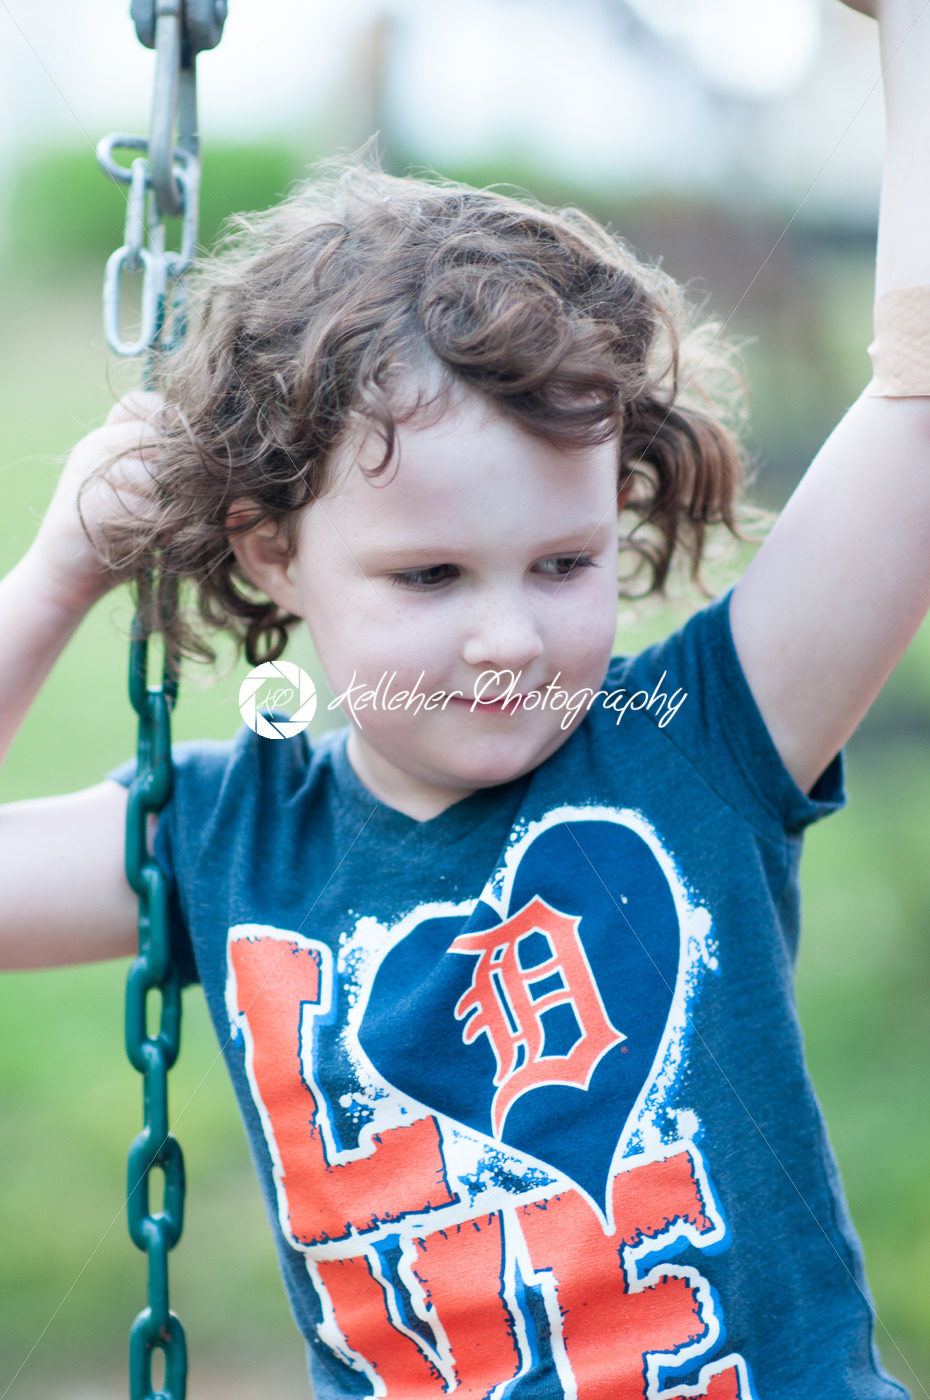 Young girl having fun on a swing set - Kelleher Photography Store